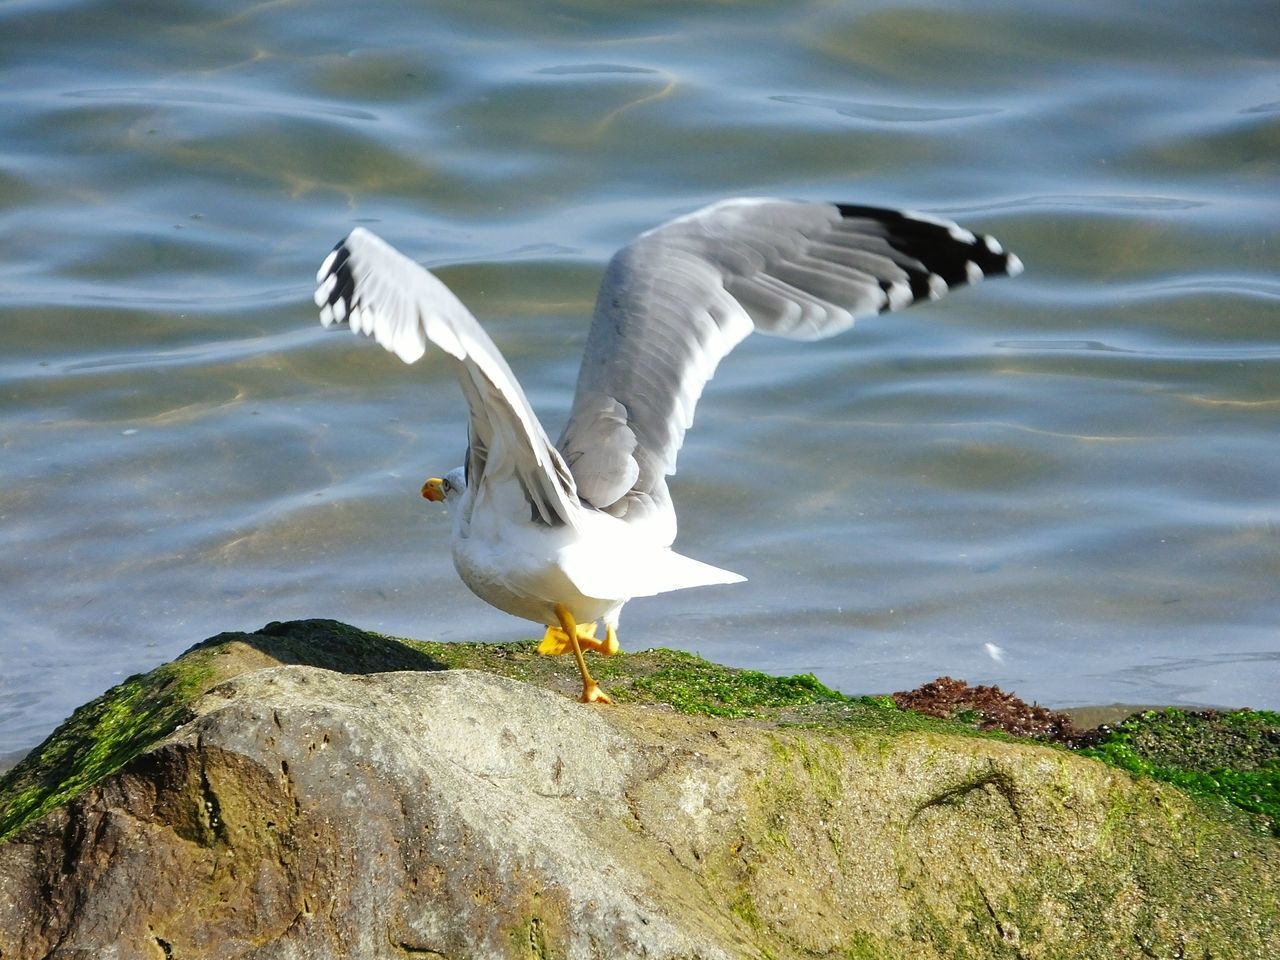 bird, animal themes, animals in the wild, wildlife, spread wings, seagull, water, flying, one animal, nature, full length, two animals, day, outdoors, side view, no people, beauty in nature, vertebrate, sea, zoology